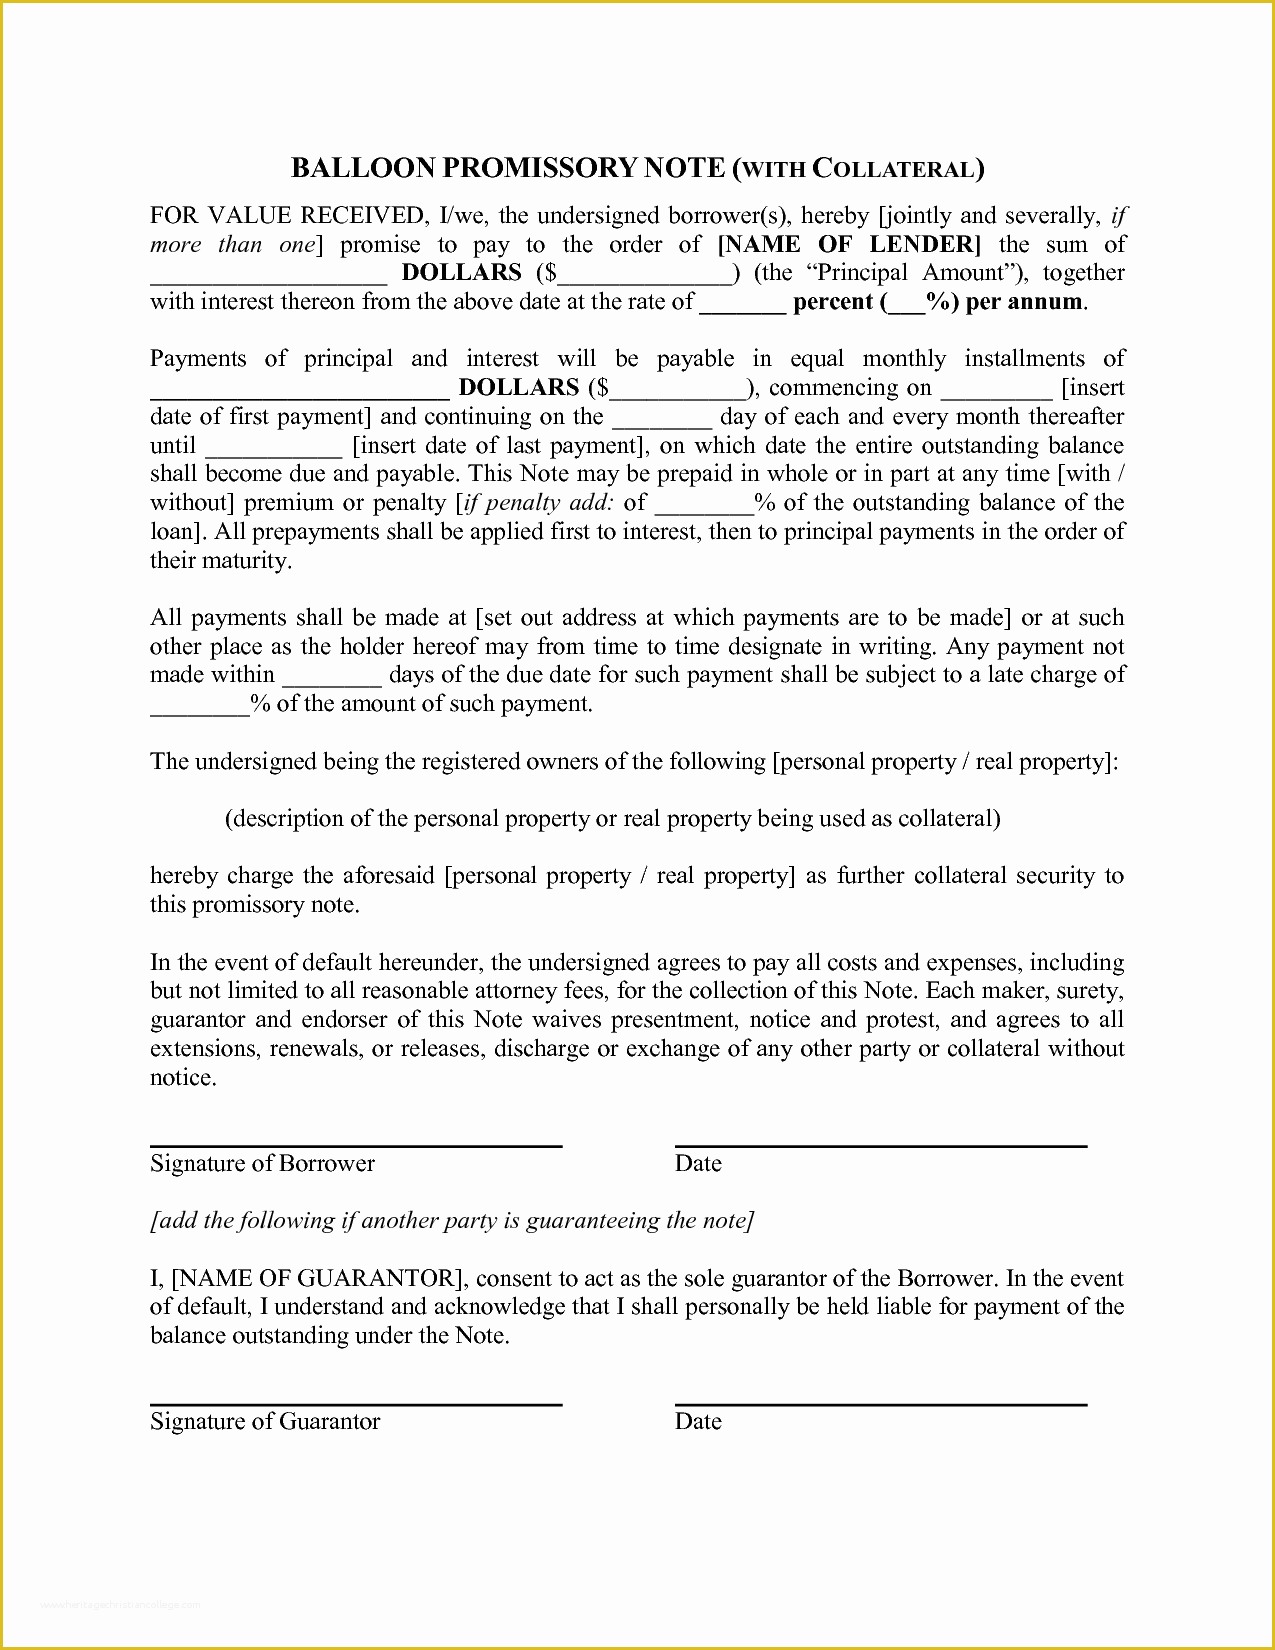 Free Promissory Note with Collateral Template Of Best S Of Balloon Business Promissory Note Template